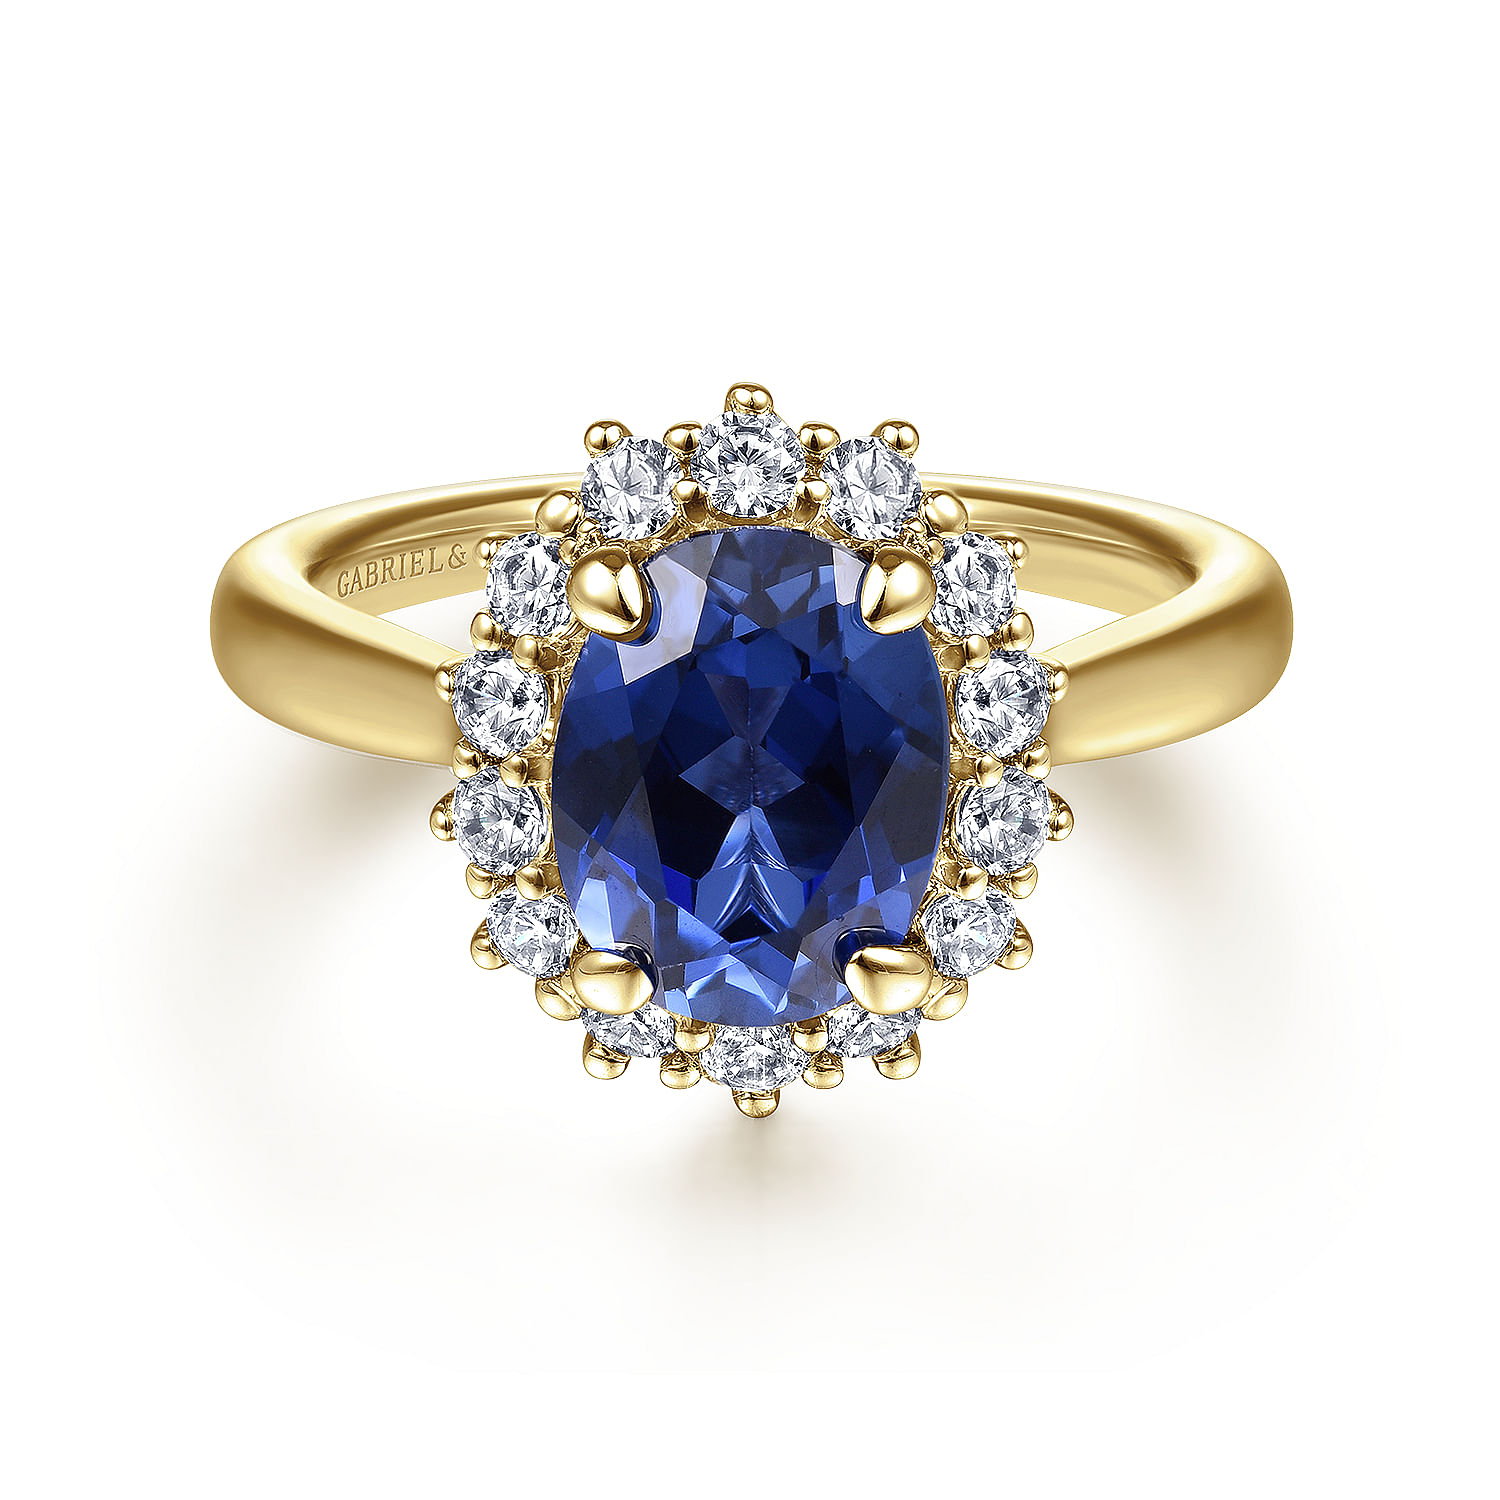 Gabriel - 14K Yellow Gold Oval Halo Sapphire and Diamond Engagement Ring